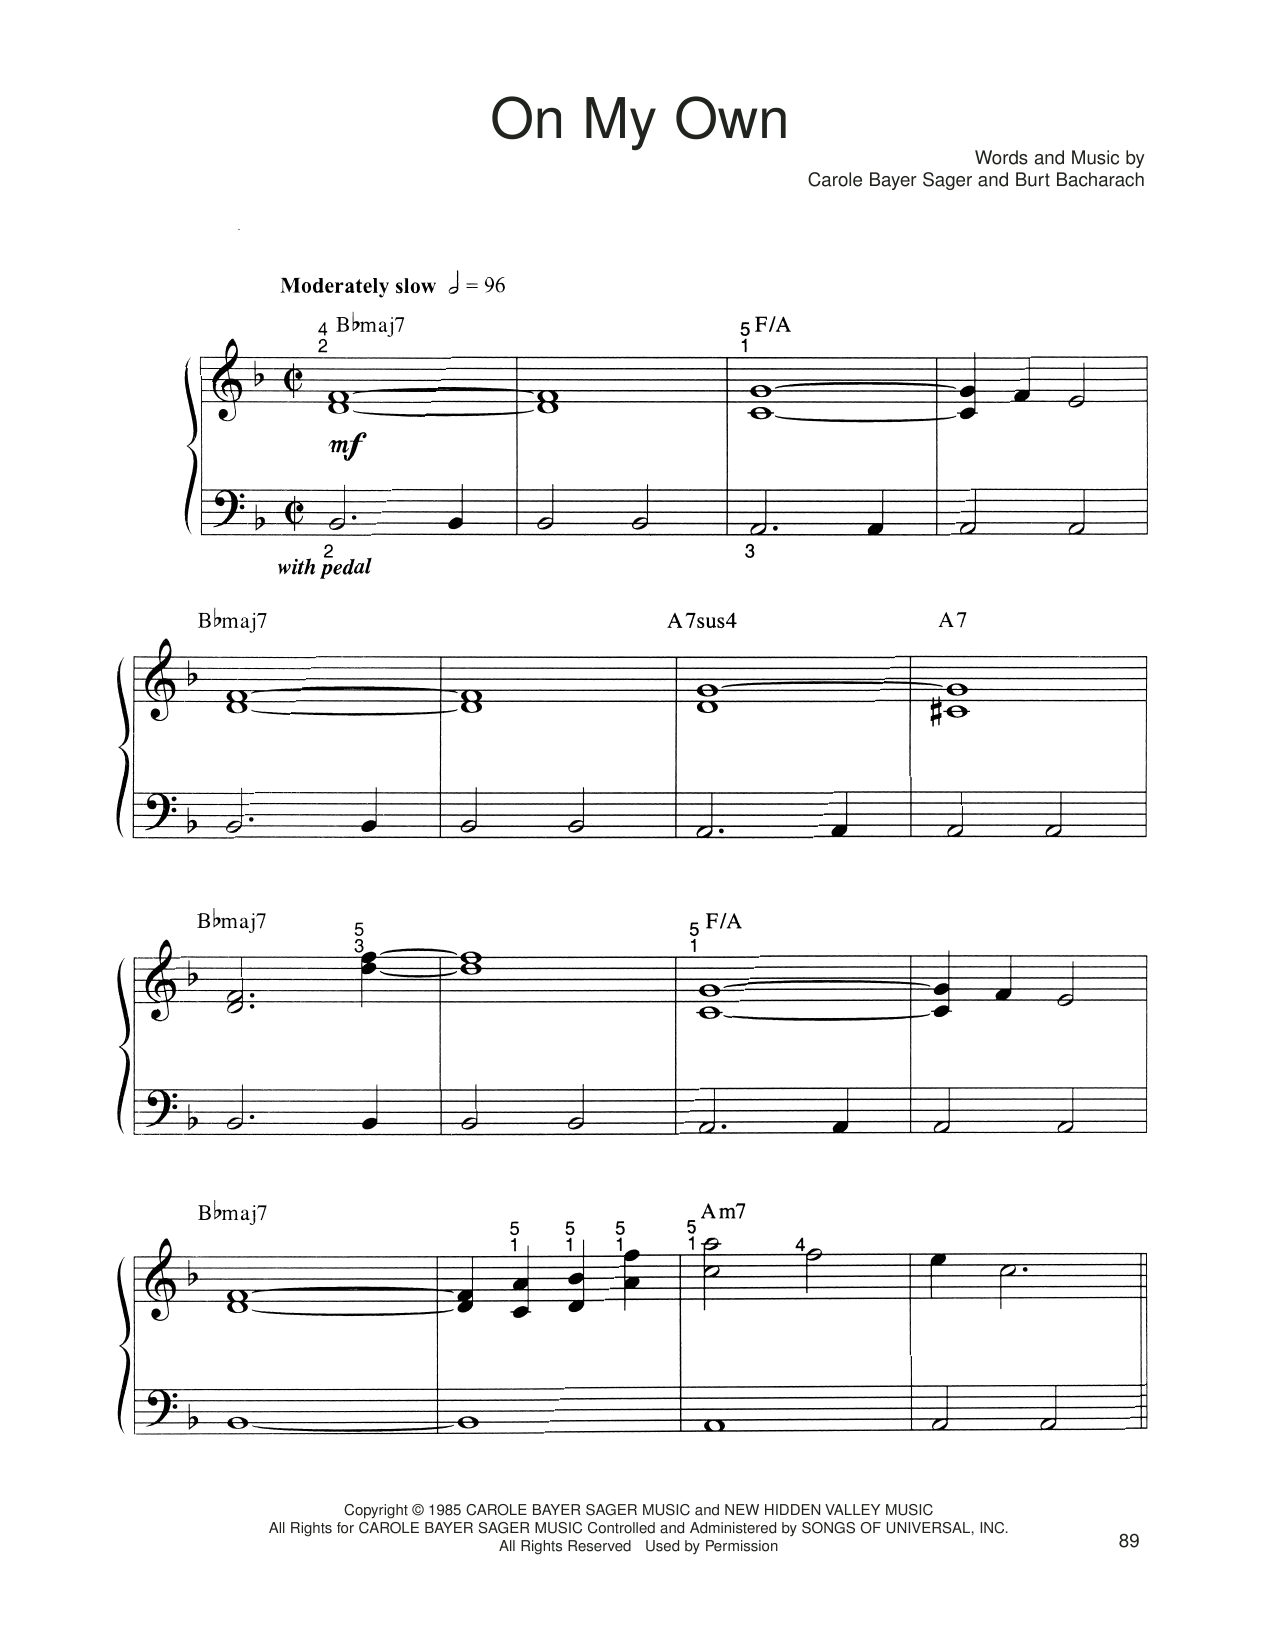 Download Patti LaBelle & Michael McDonald On My Own Sheet Music